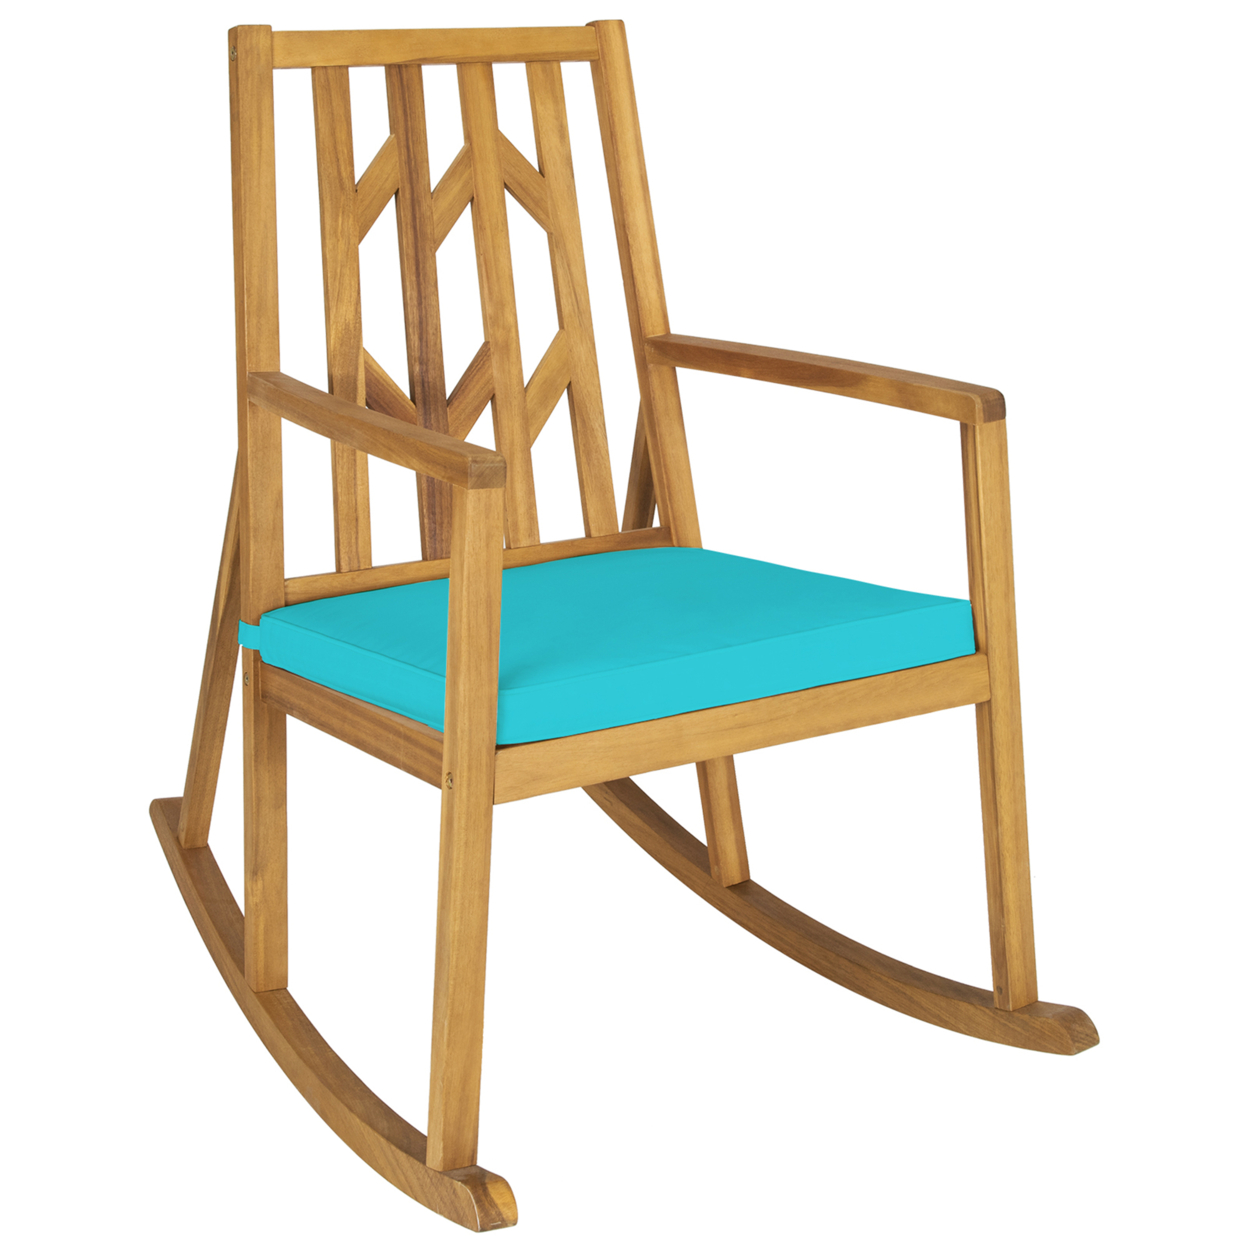 Outdoor Acacia Wood Rocking Chair Wooden Patio Rocker W/ Turquoise Cushion